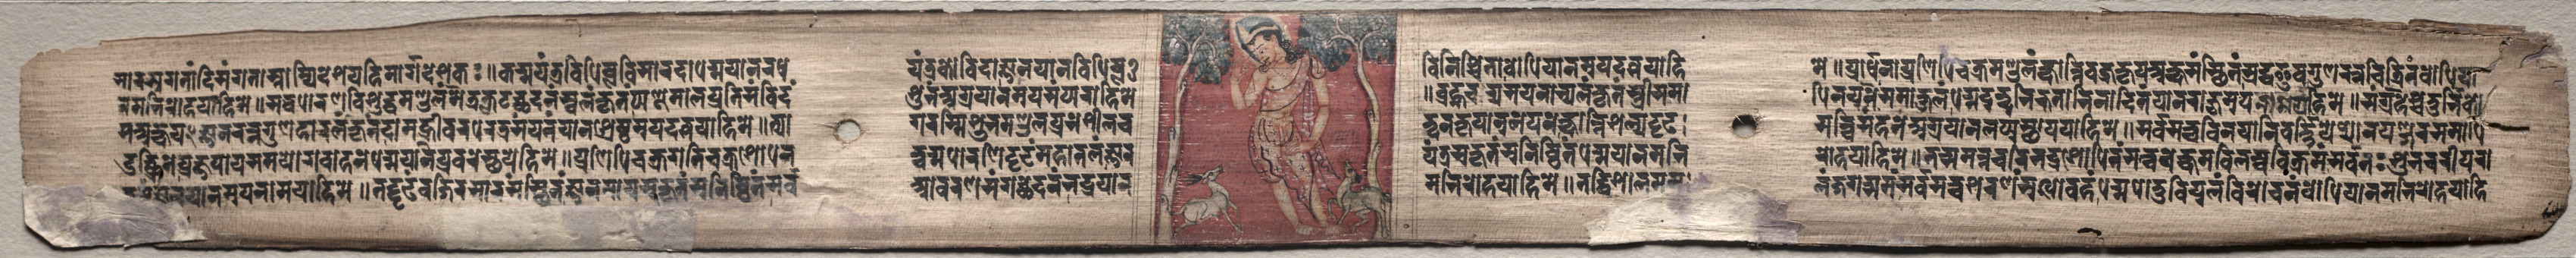 Sudhana and a pair of antelopes, folio 37 (recto) from a Gandavyuha-sutra (Scripture of the Supreme Array)